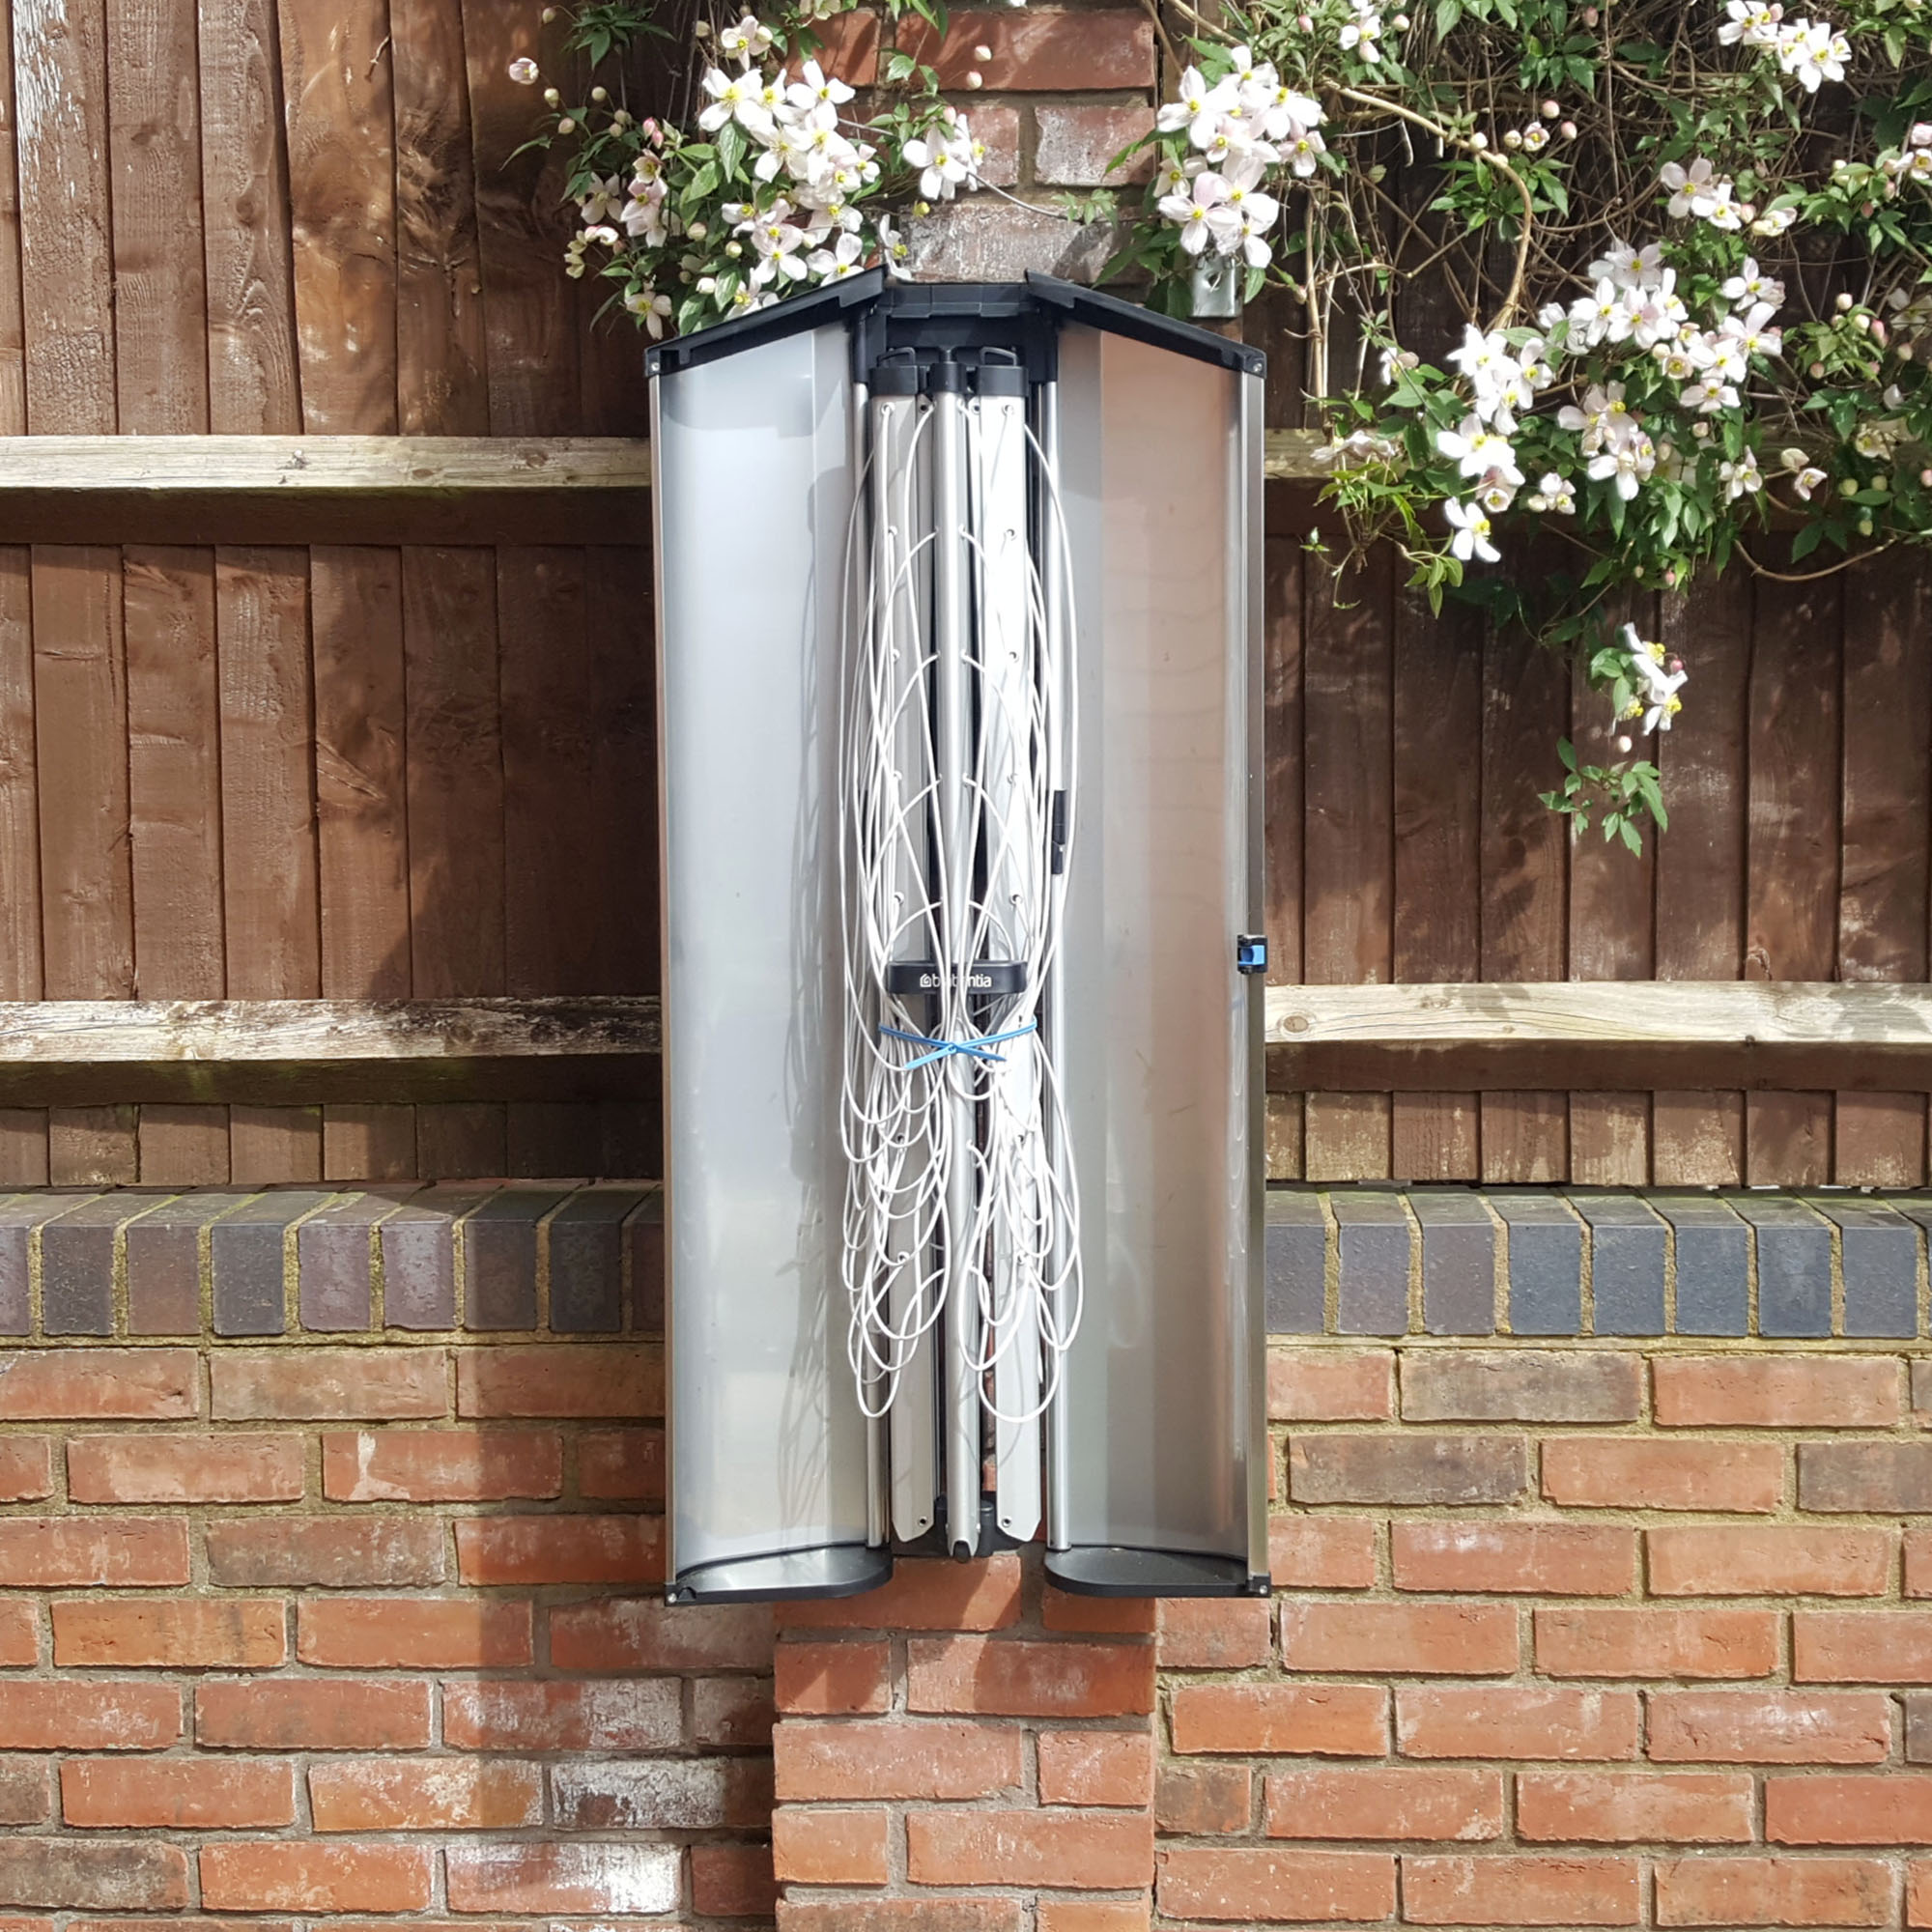 The Brabantia Wallfix Dryer mounted in a small patio